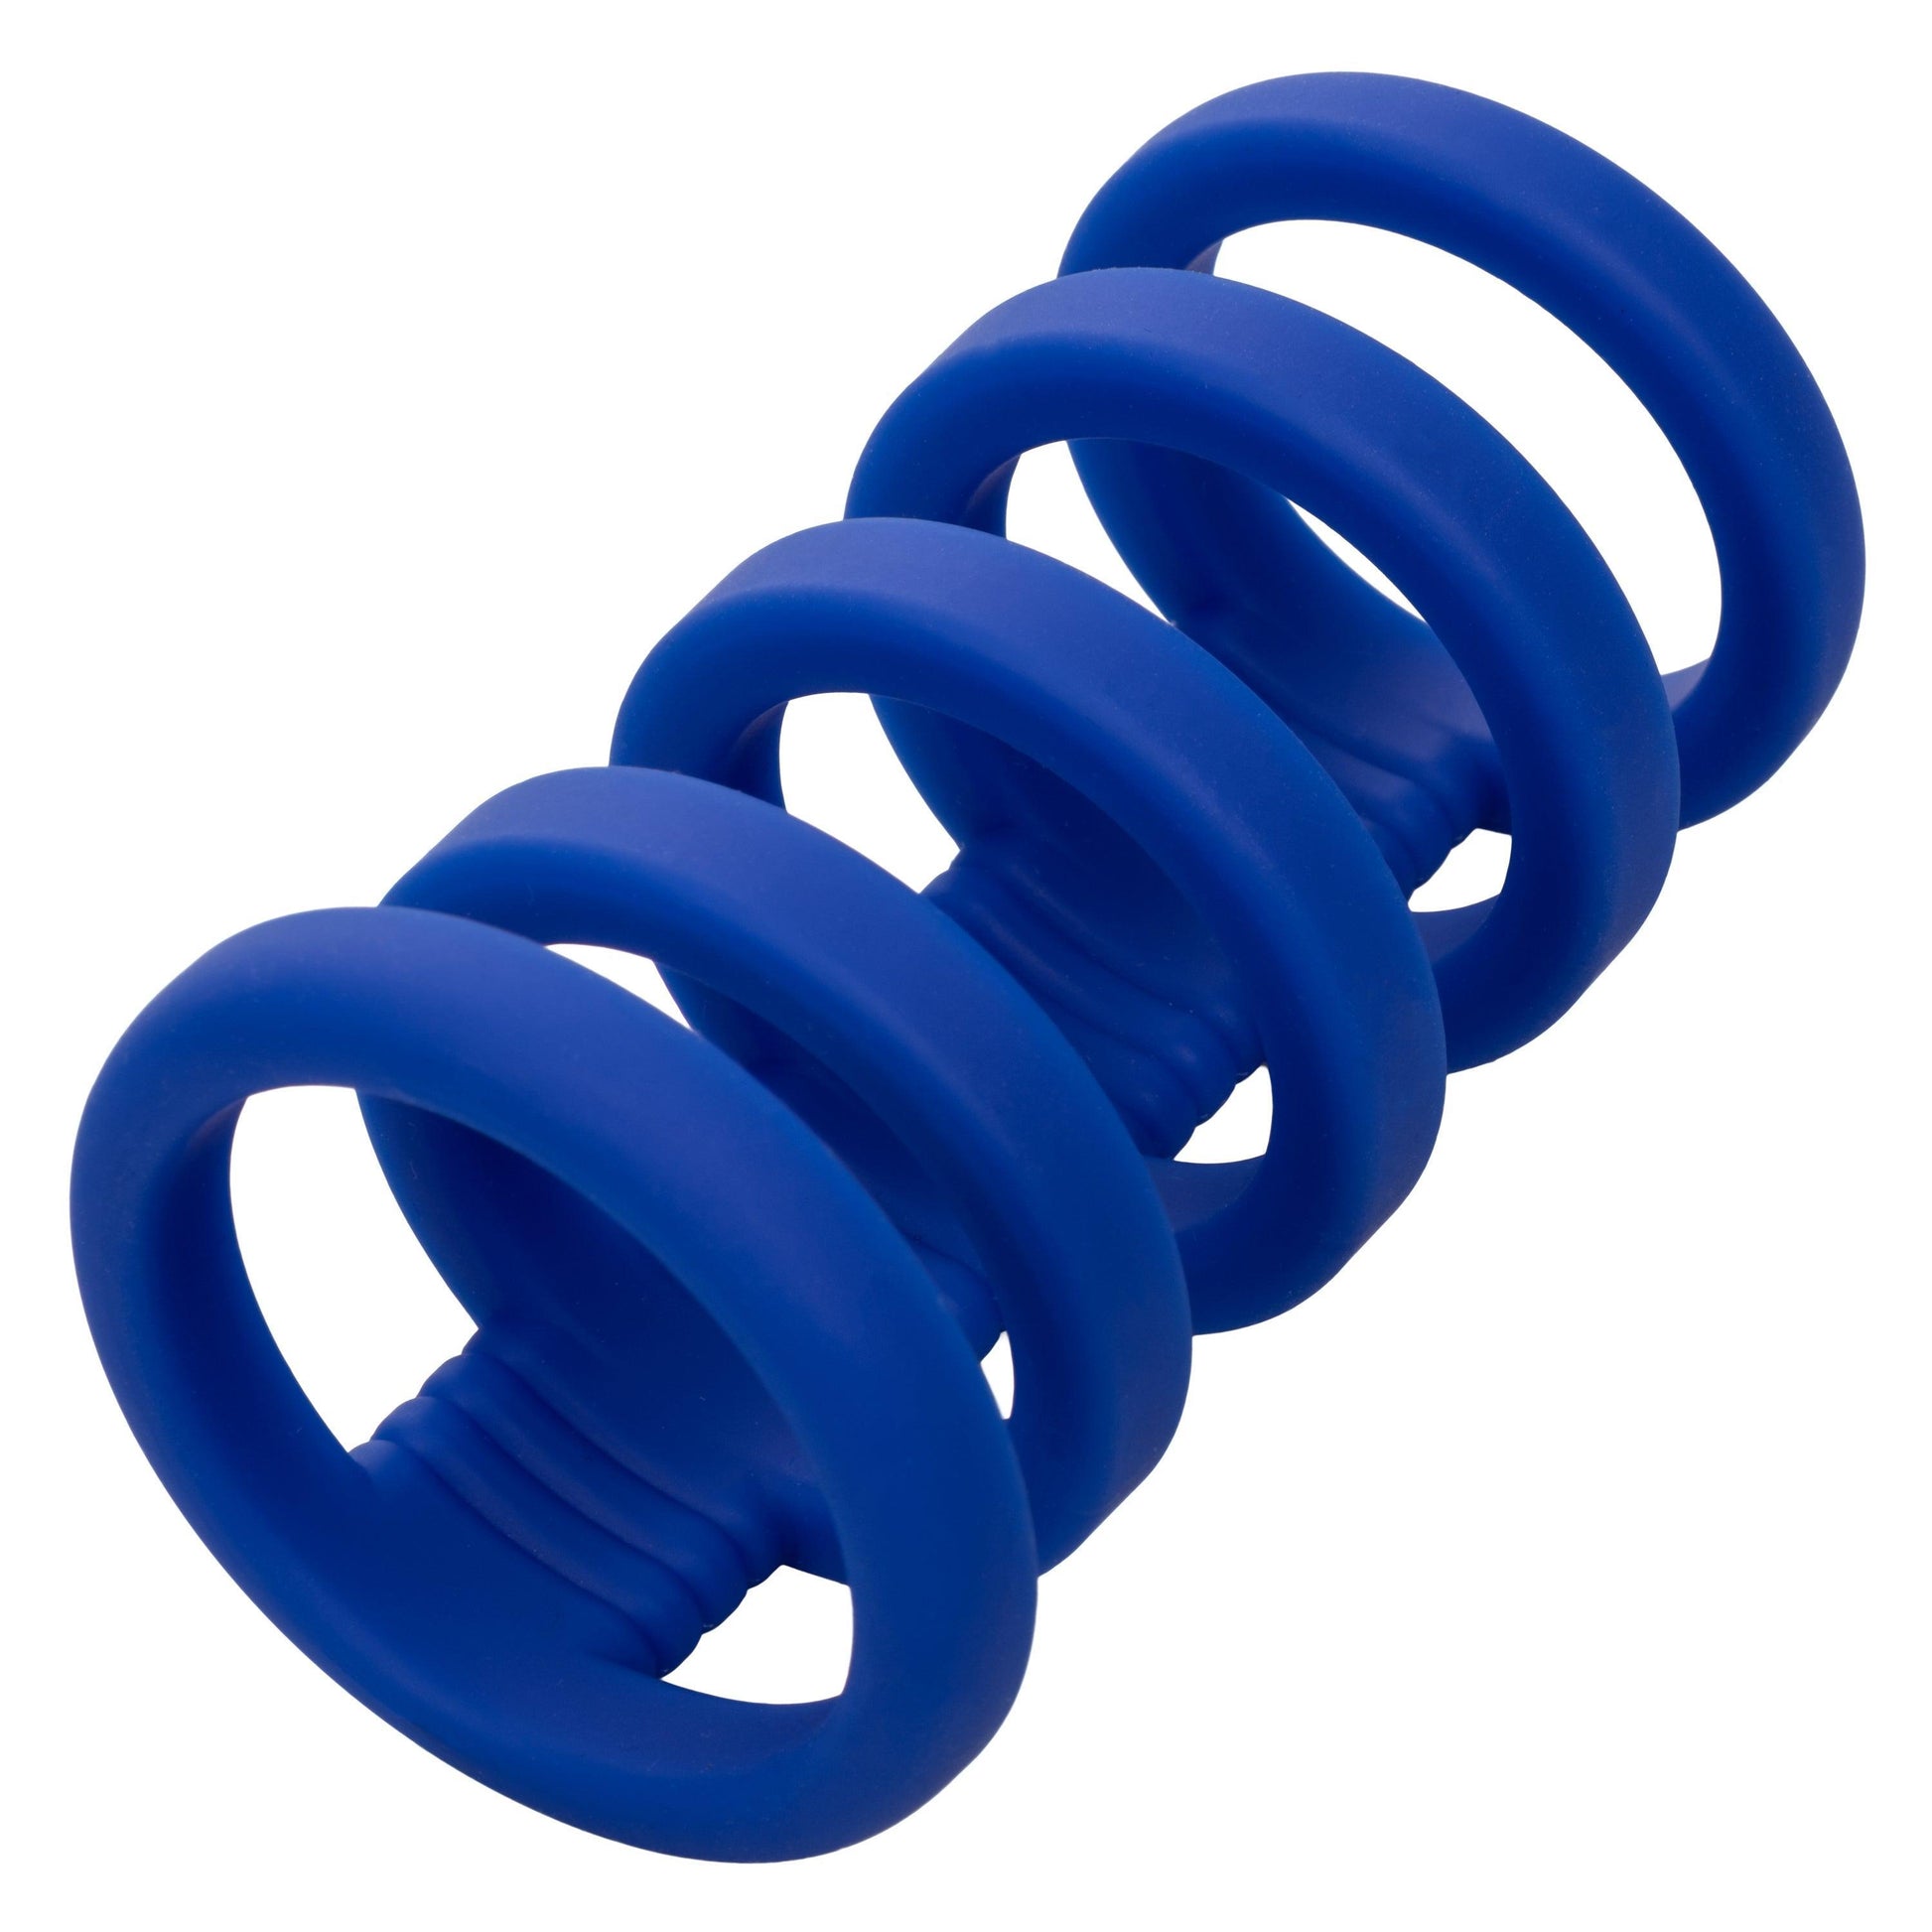 Admiral Xtreme Cock Cage- Blue - My Sex Toy Hub